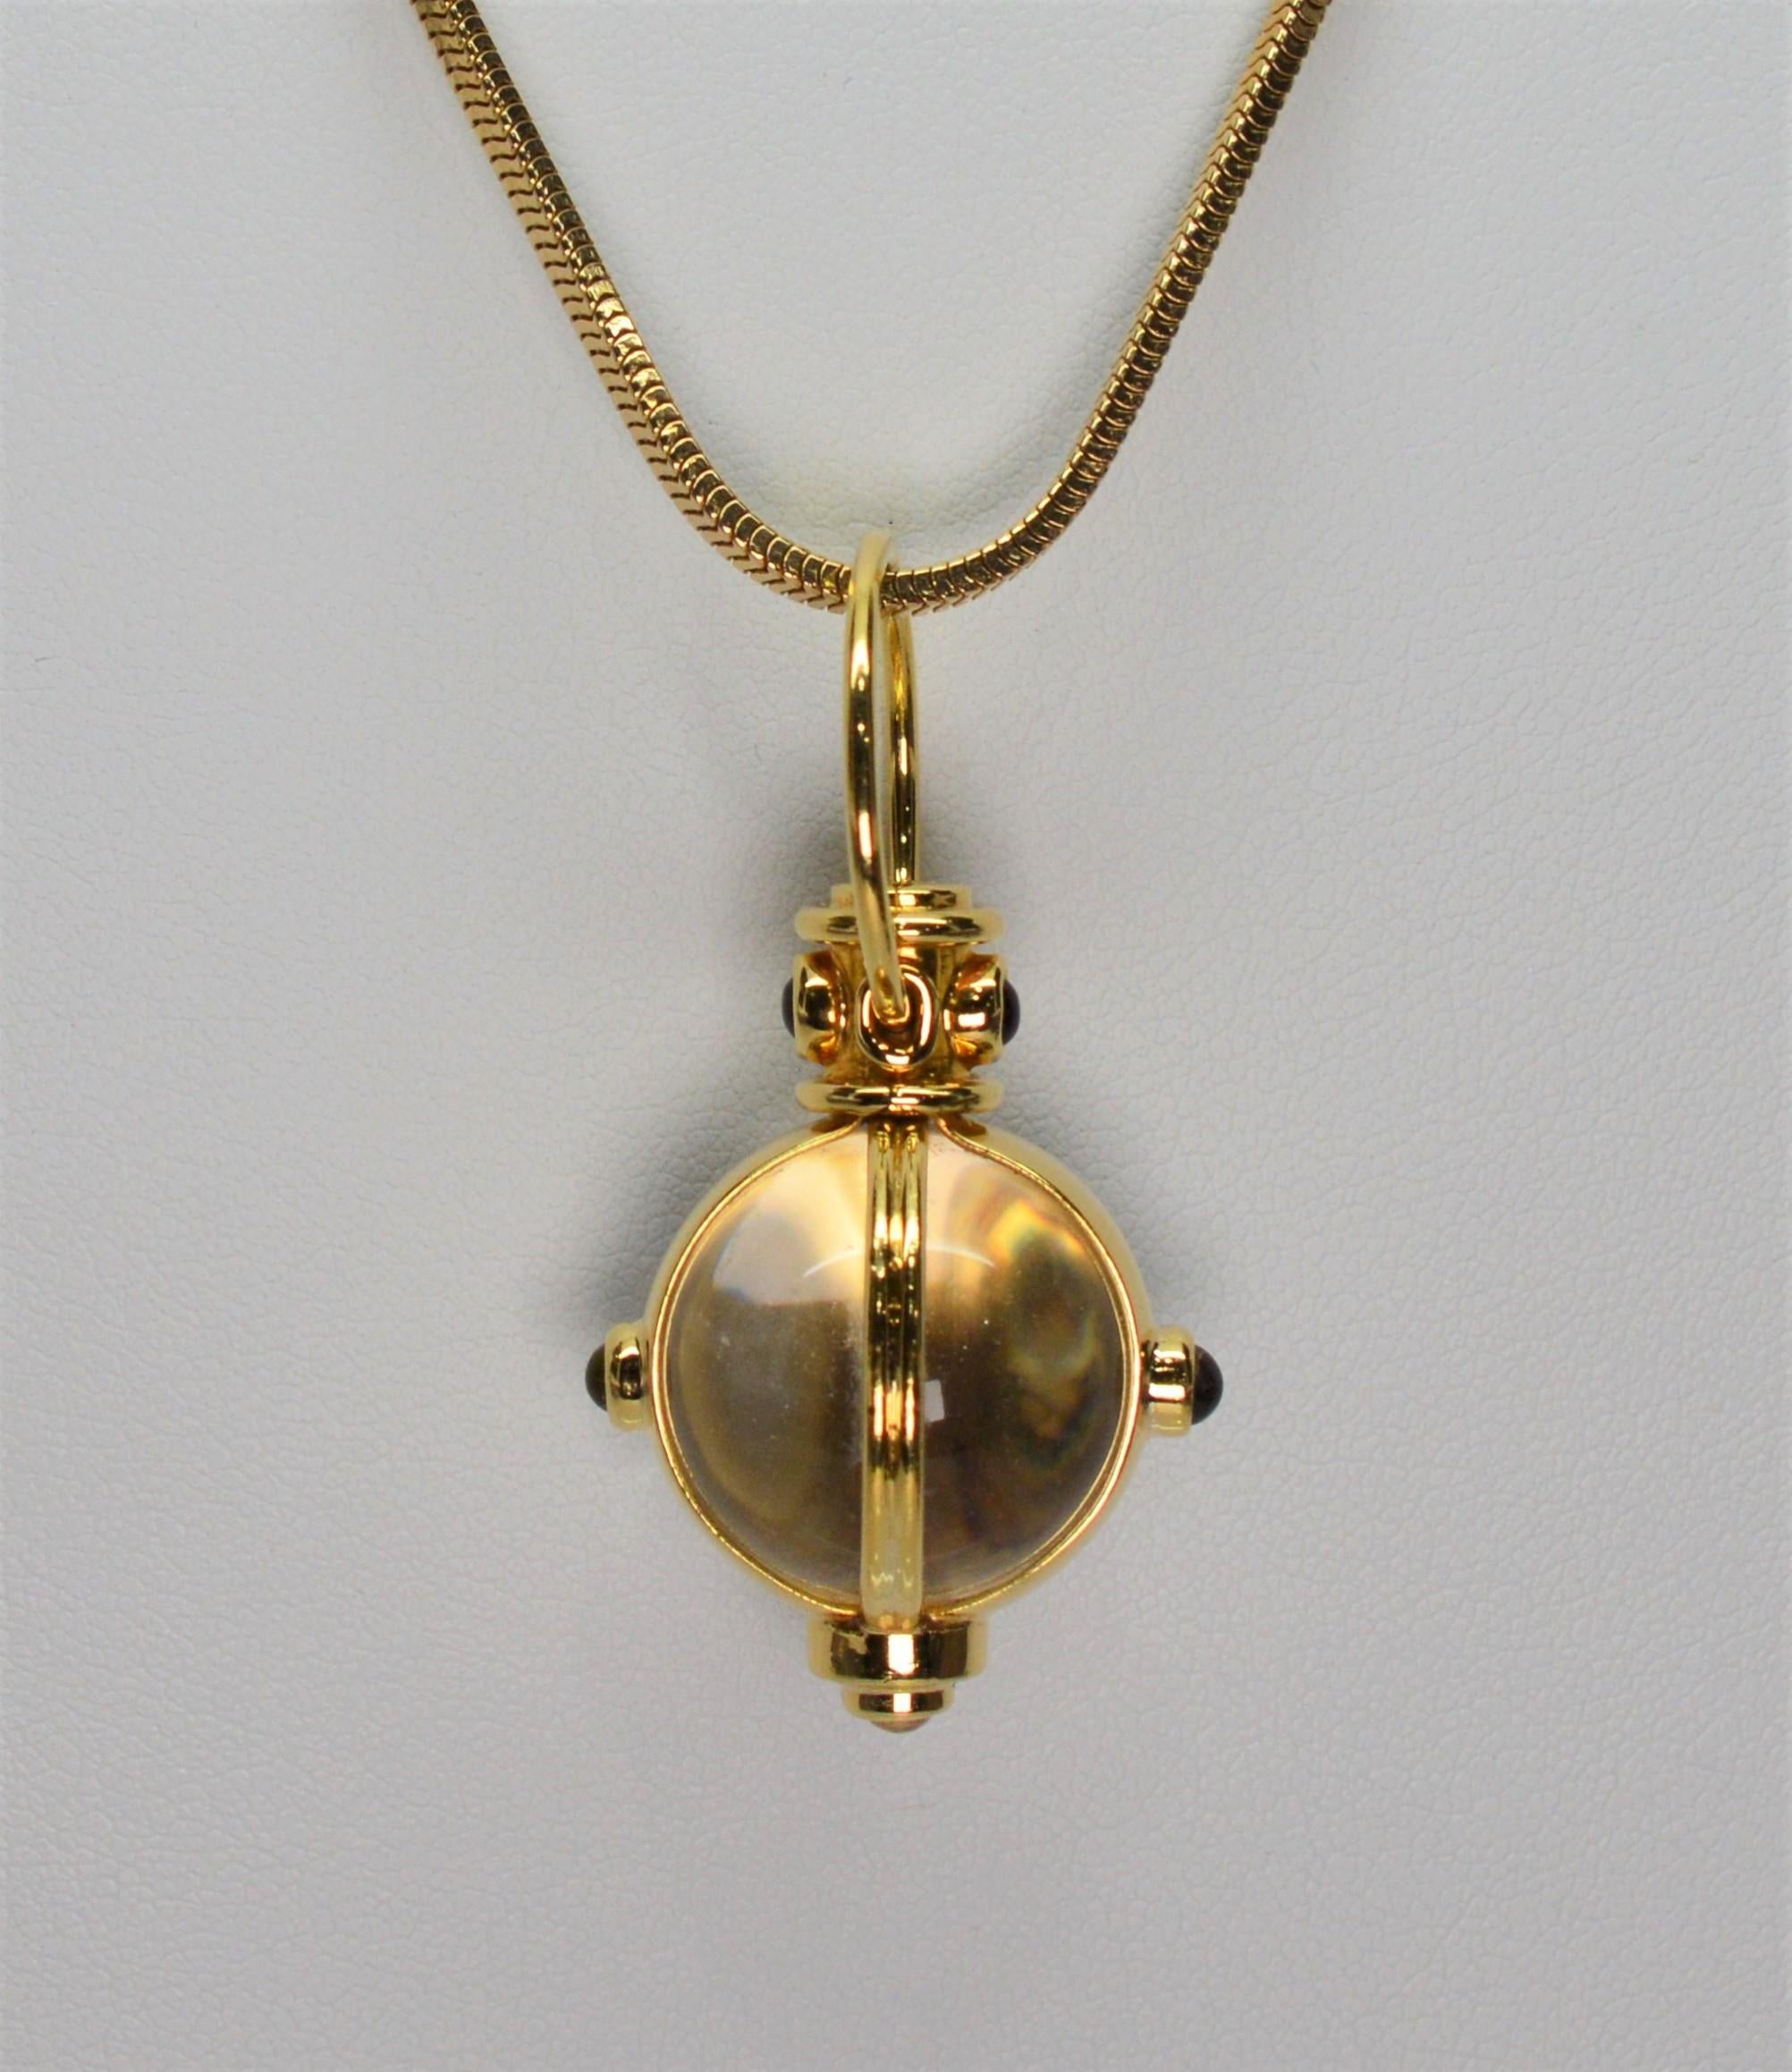 Crystal Ball Charm 18 Karat Yellow Gold Necklace In Excellent Condition For Sale In Mount Kisco, NY